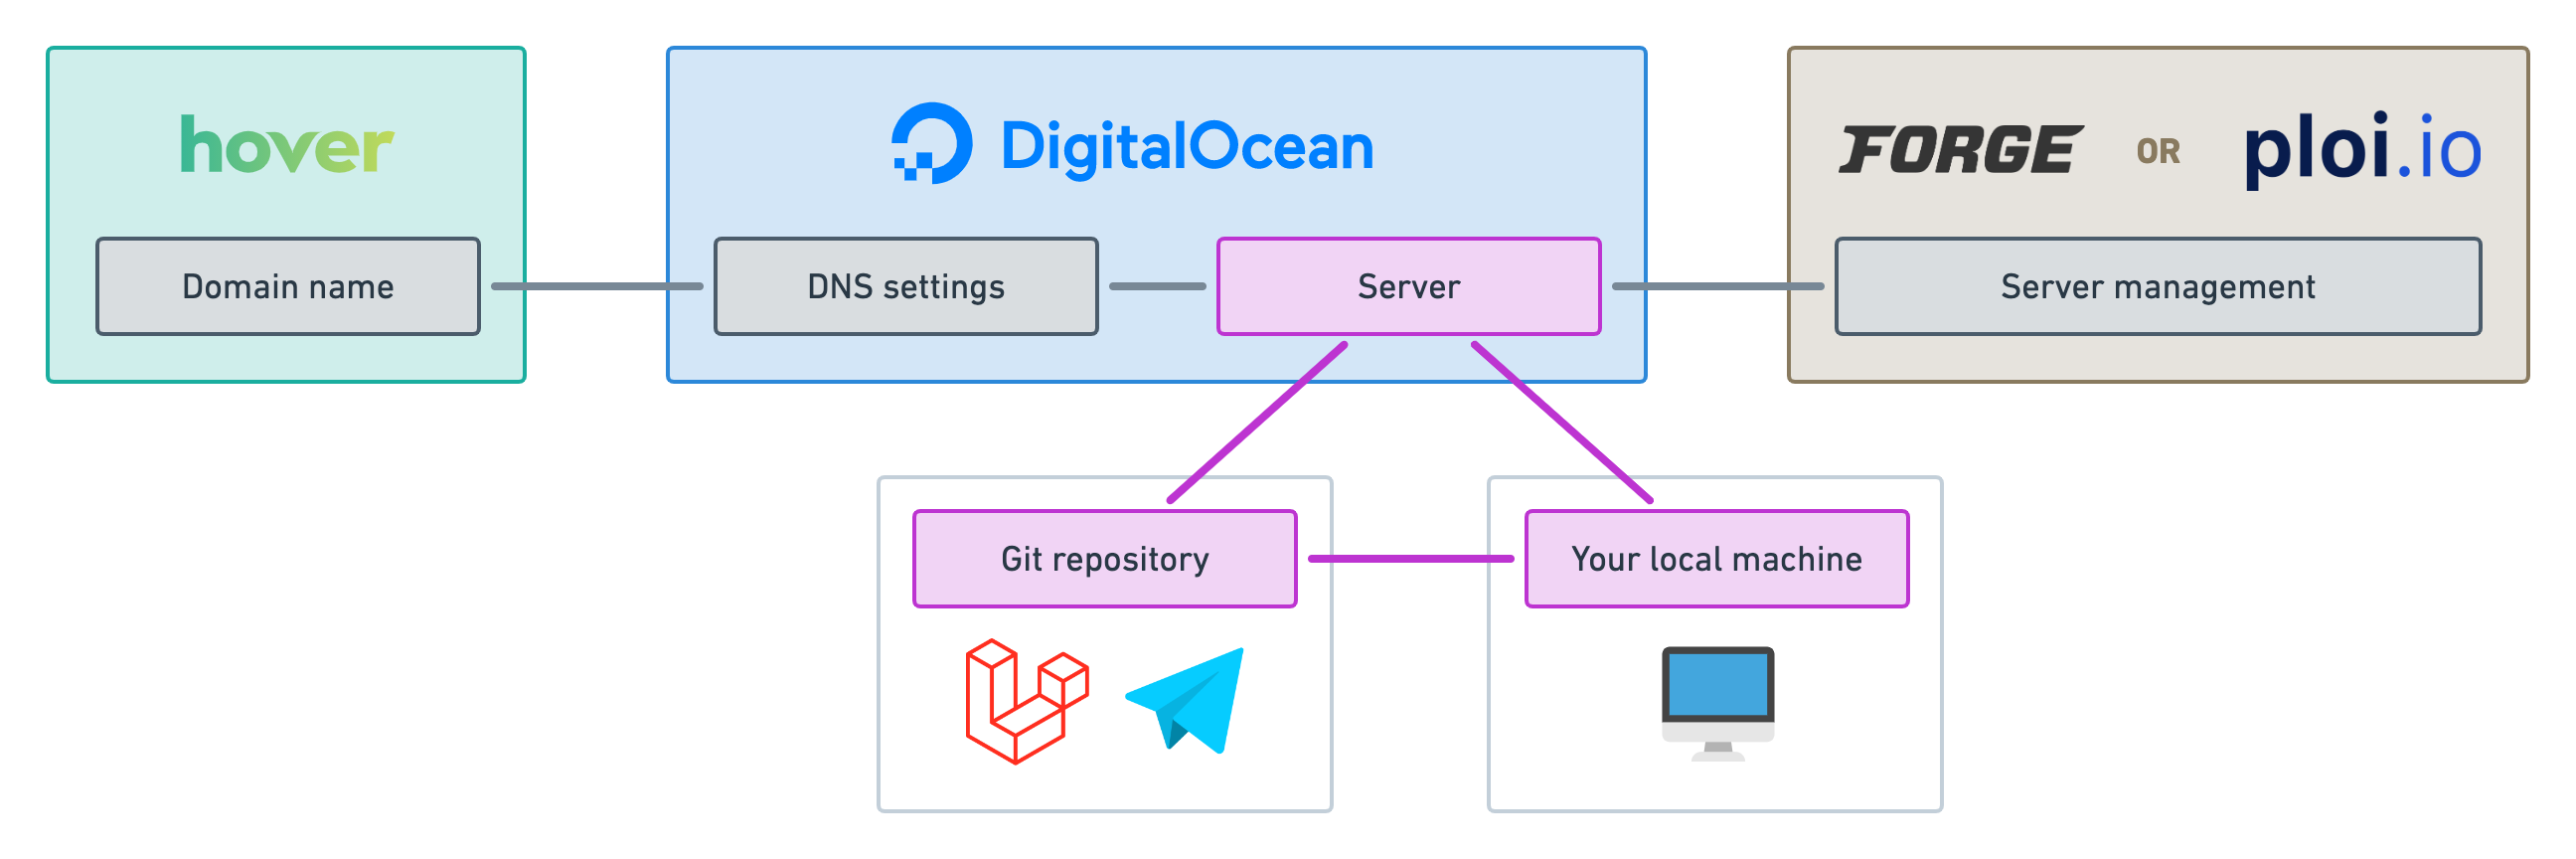 Our “big picture” diagram with “Server”, “Local machine” and “Git repository” highlighted.